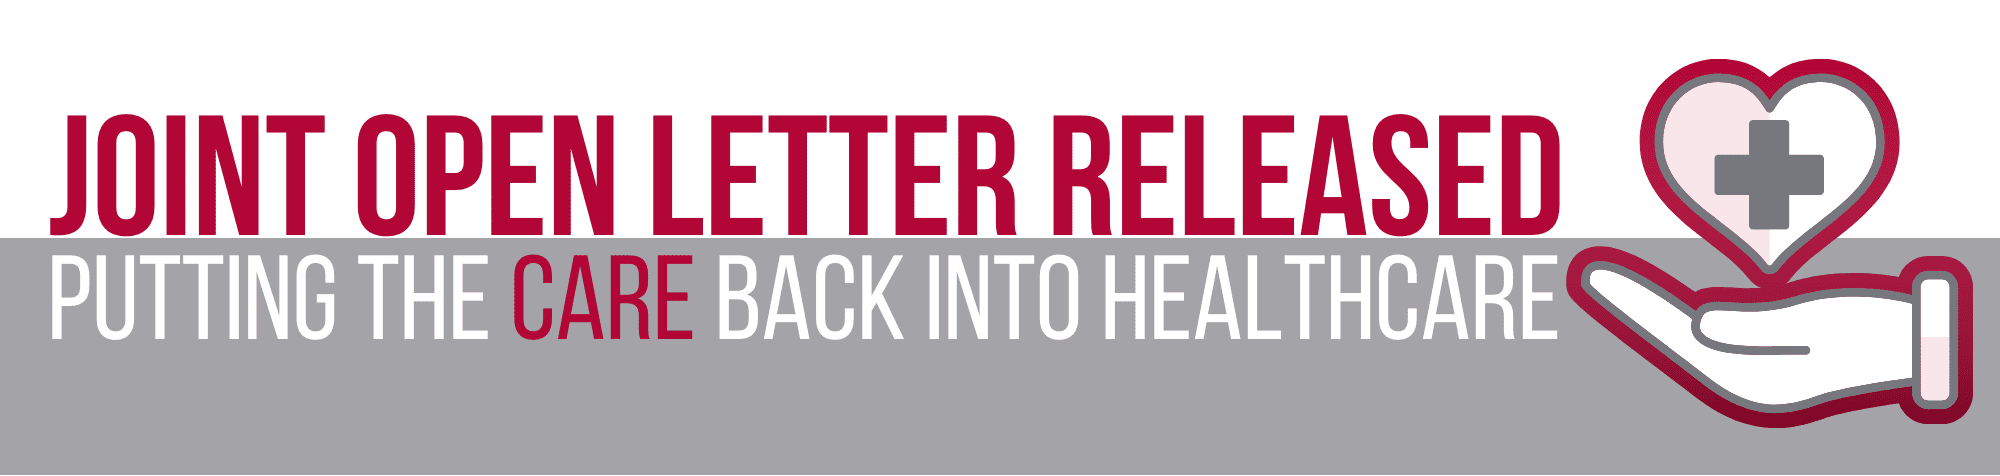 Joint open letter released, Putting the care back into healthcare.